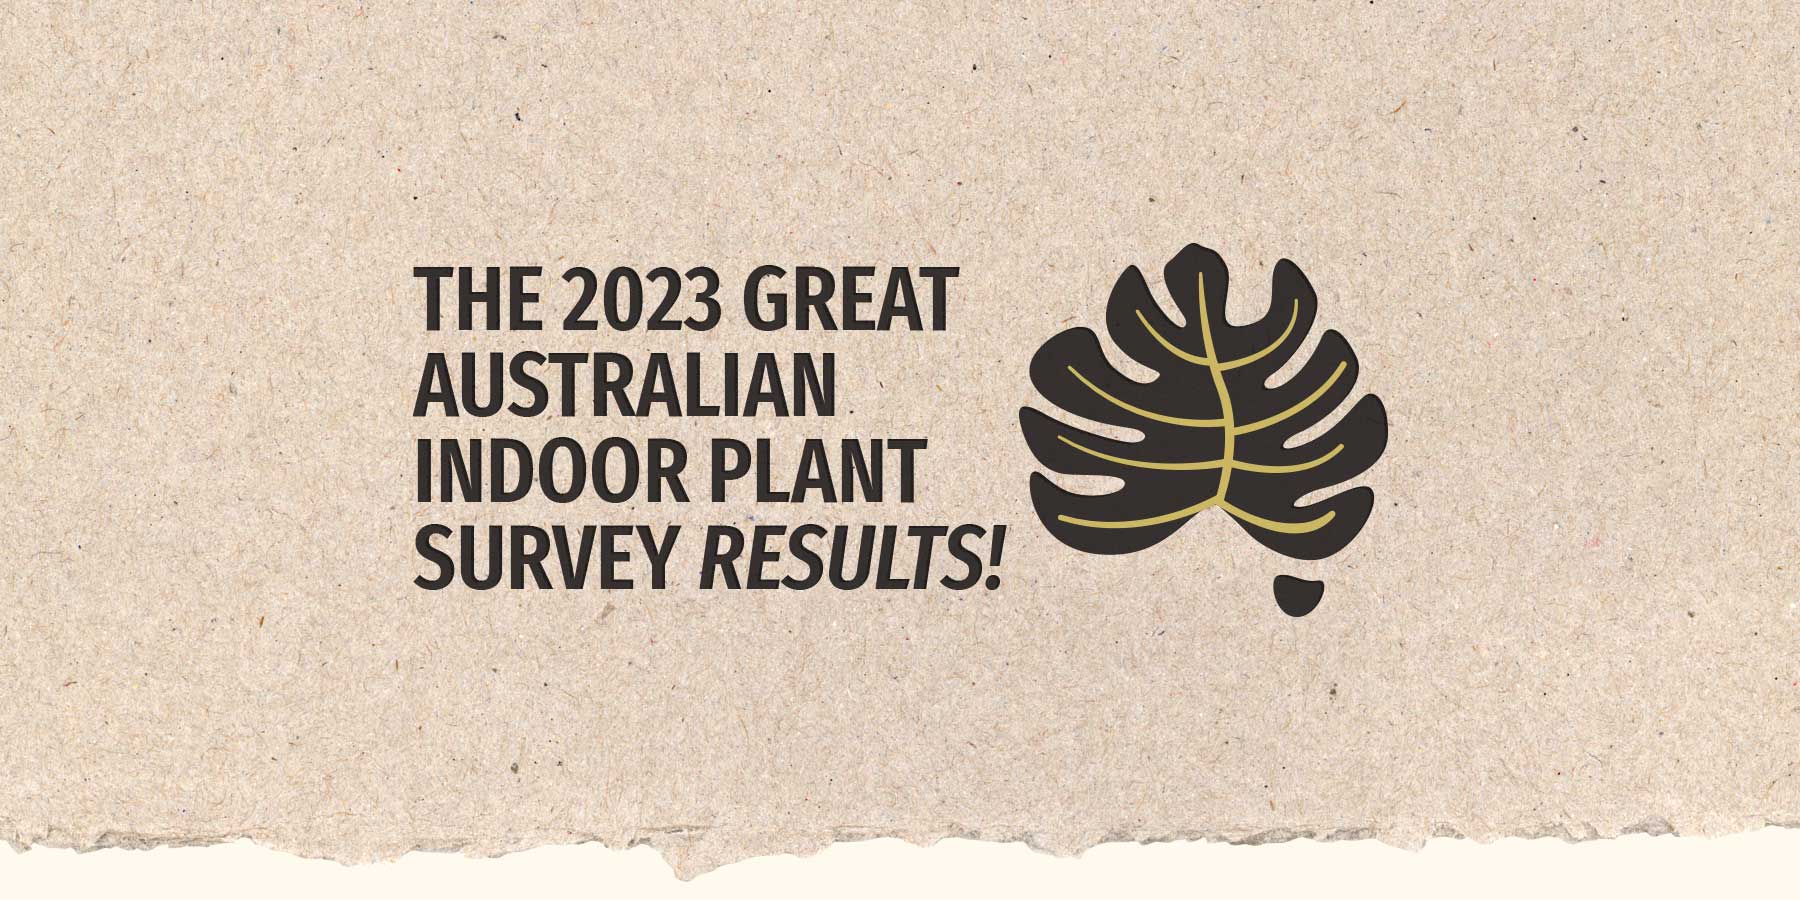 The Results Are In - Our 2023 Great Australian Indoor Plant Survey